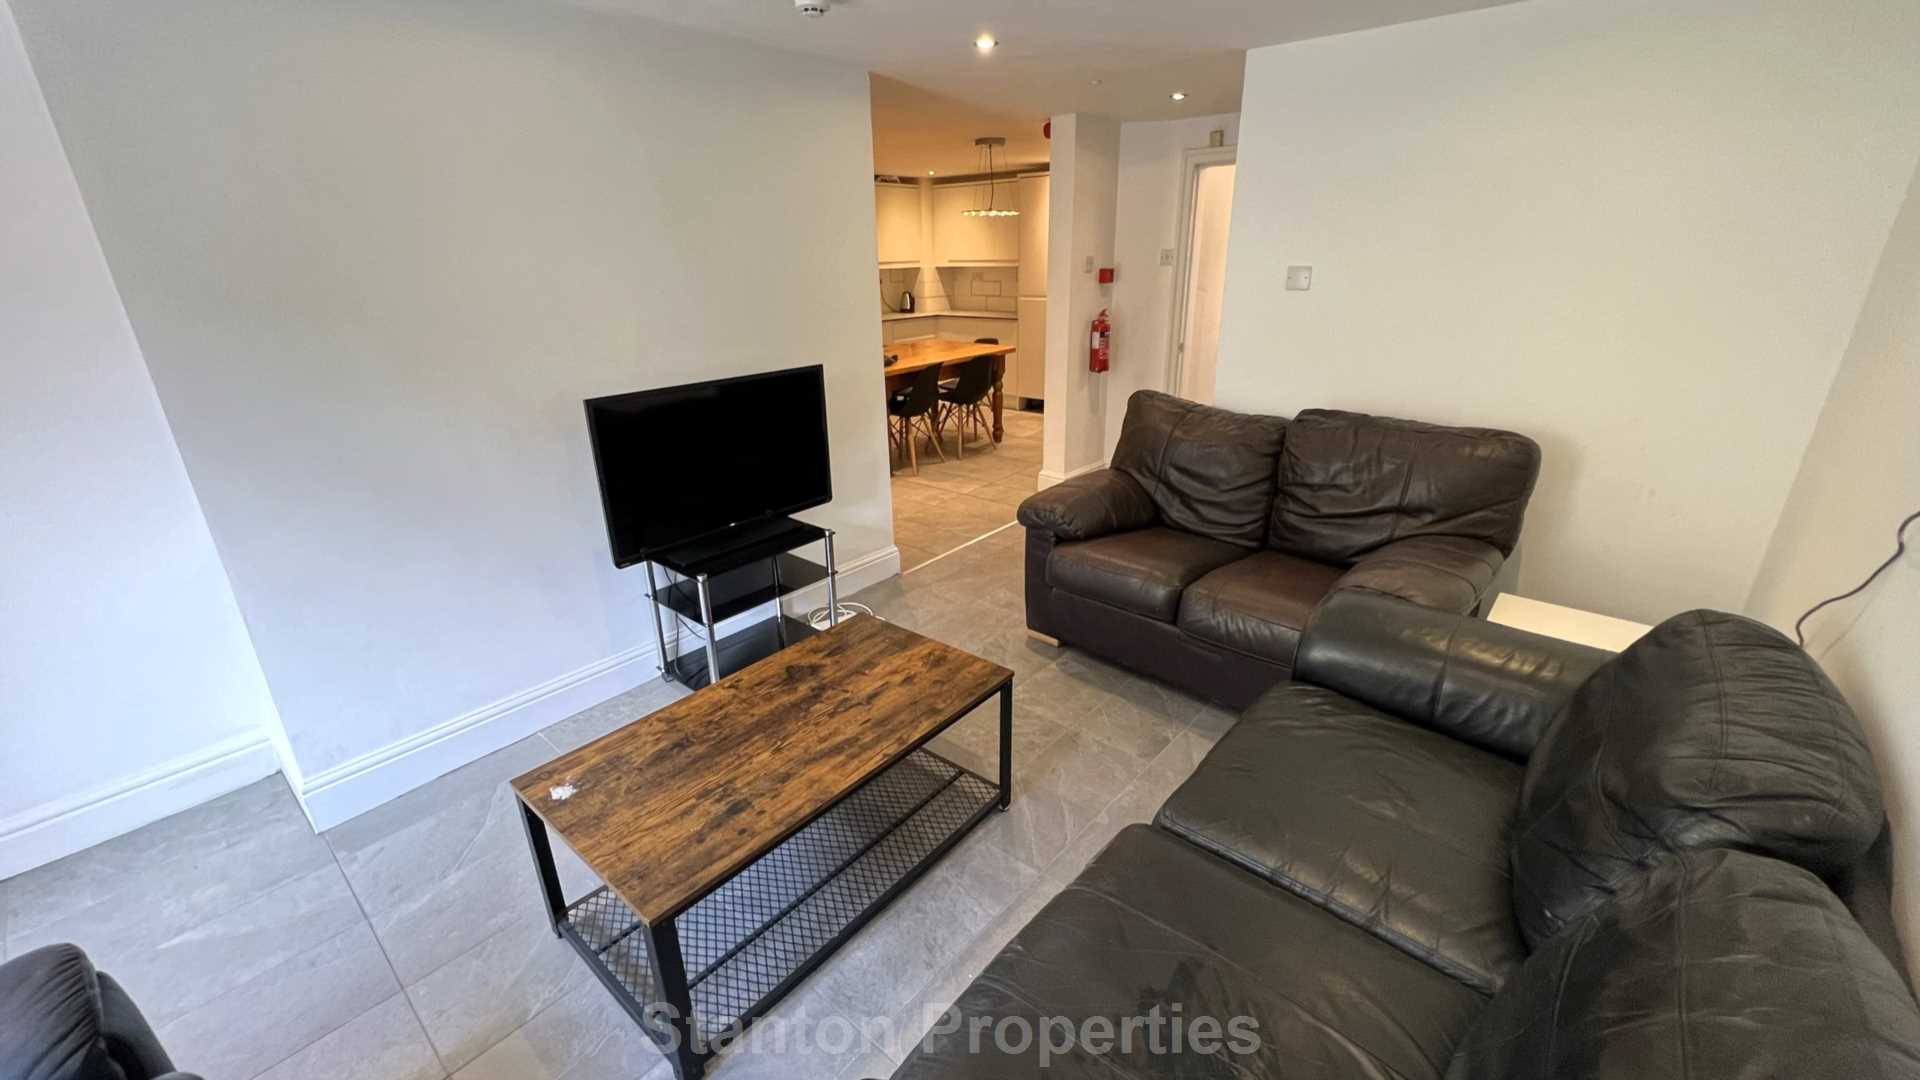 £145 pppw, Linden Grove, Fallowfield, Image 8